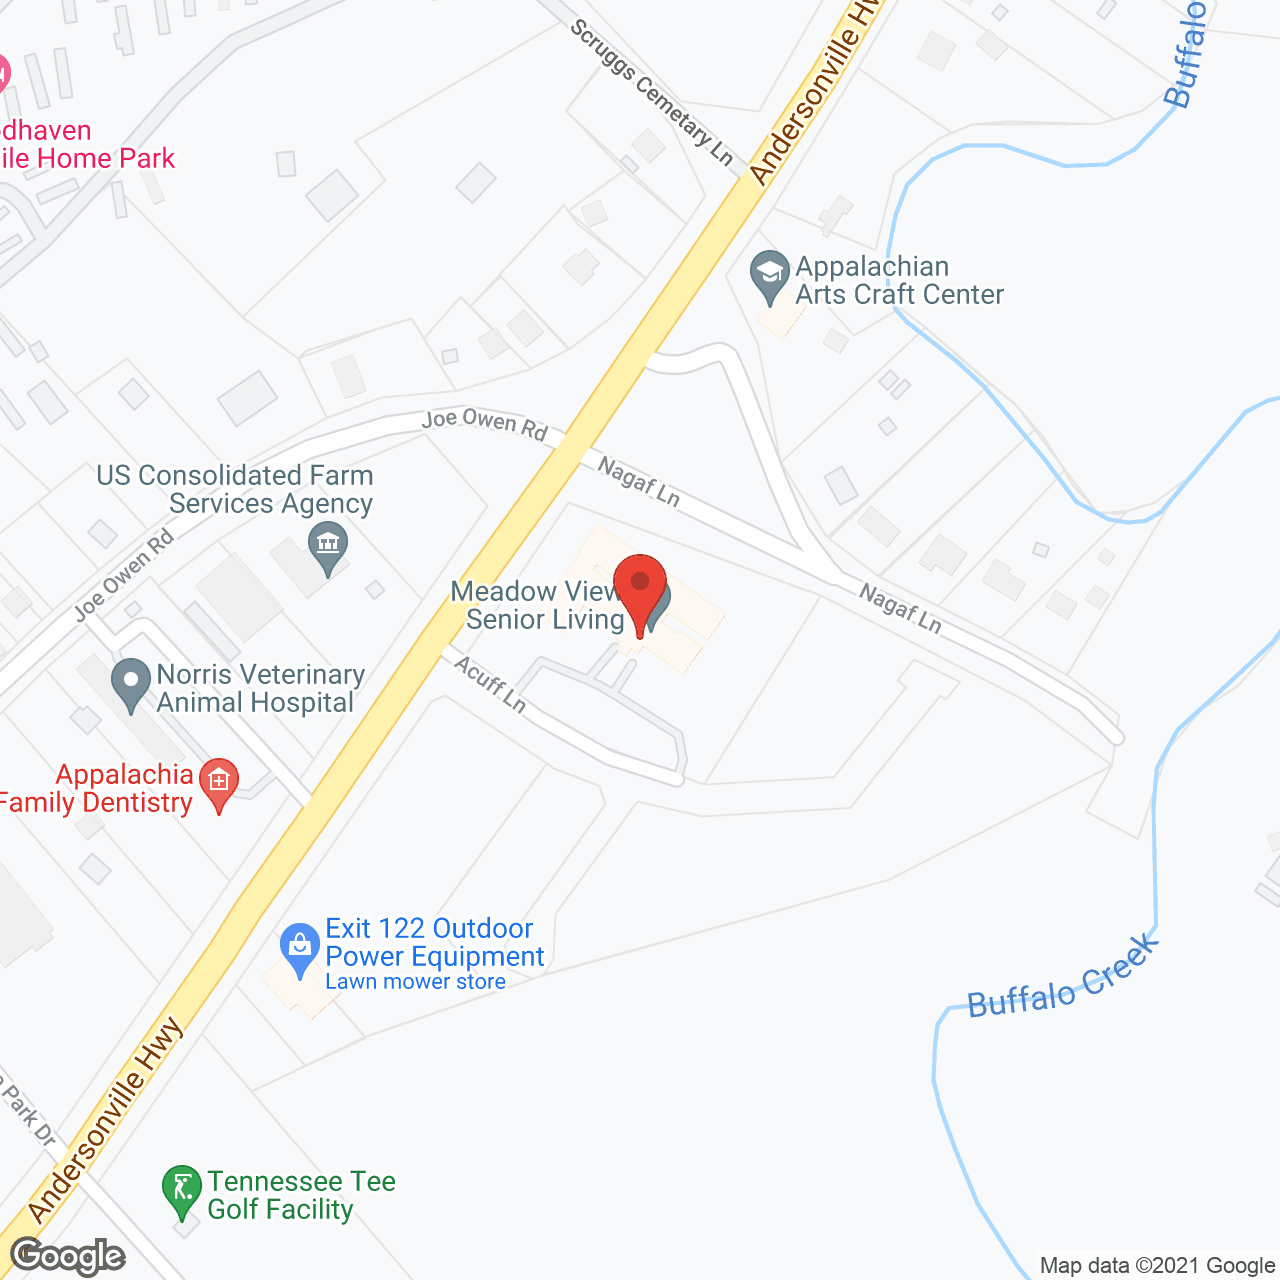 Meadow View Senior Living Community in google map